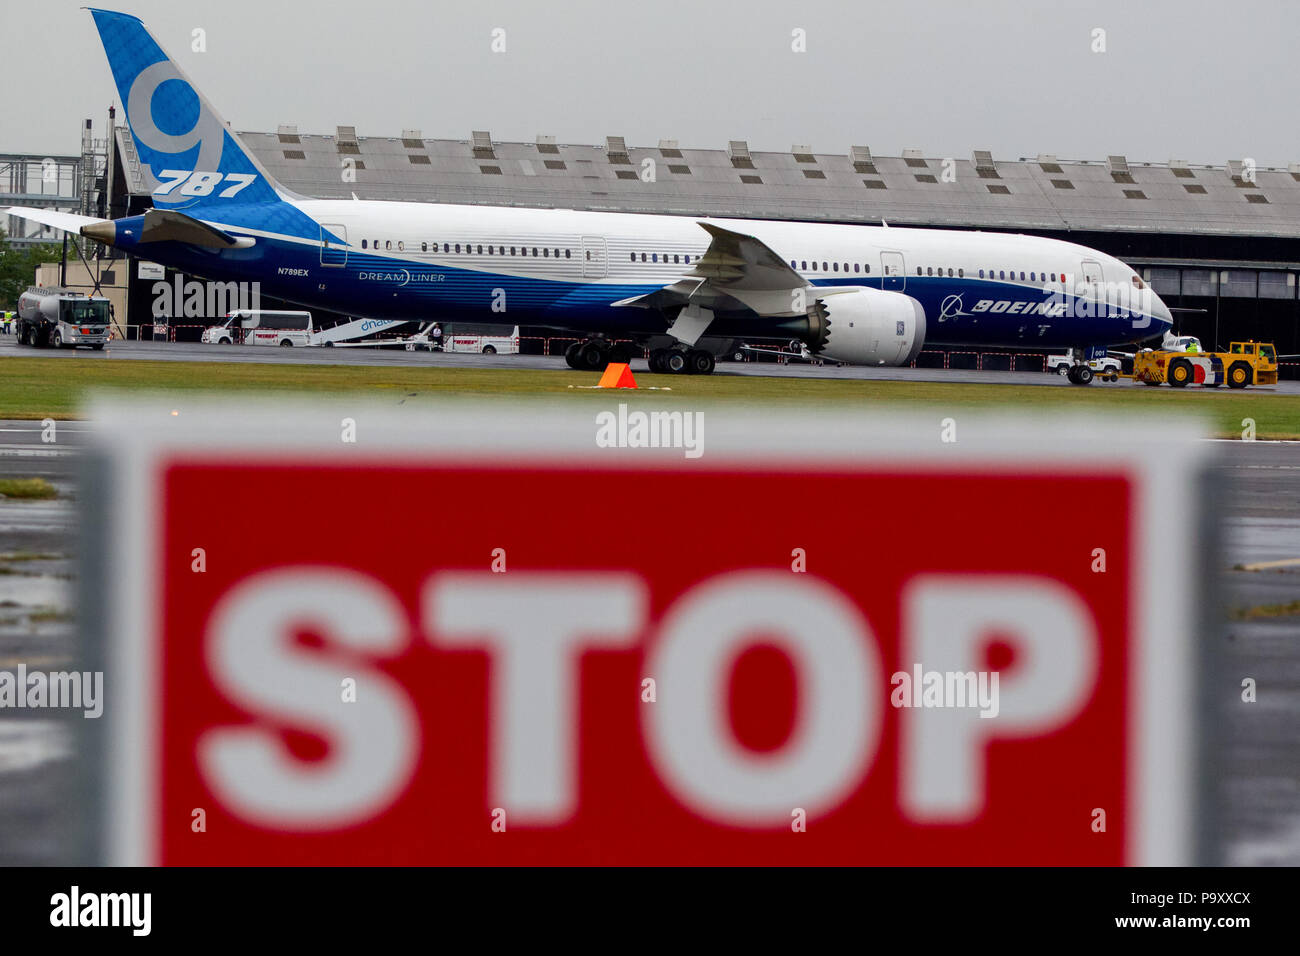 The Boeing 787-9 'Dreamliner' pictured behind the 'STOP' sign at the Farnborough International Airshow, UK Stock Photo